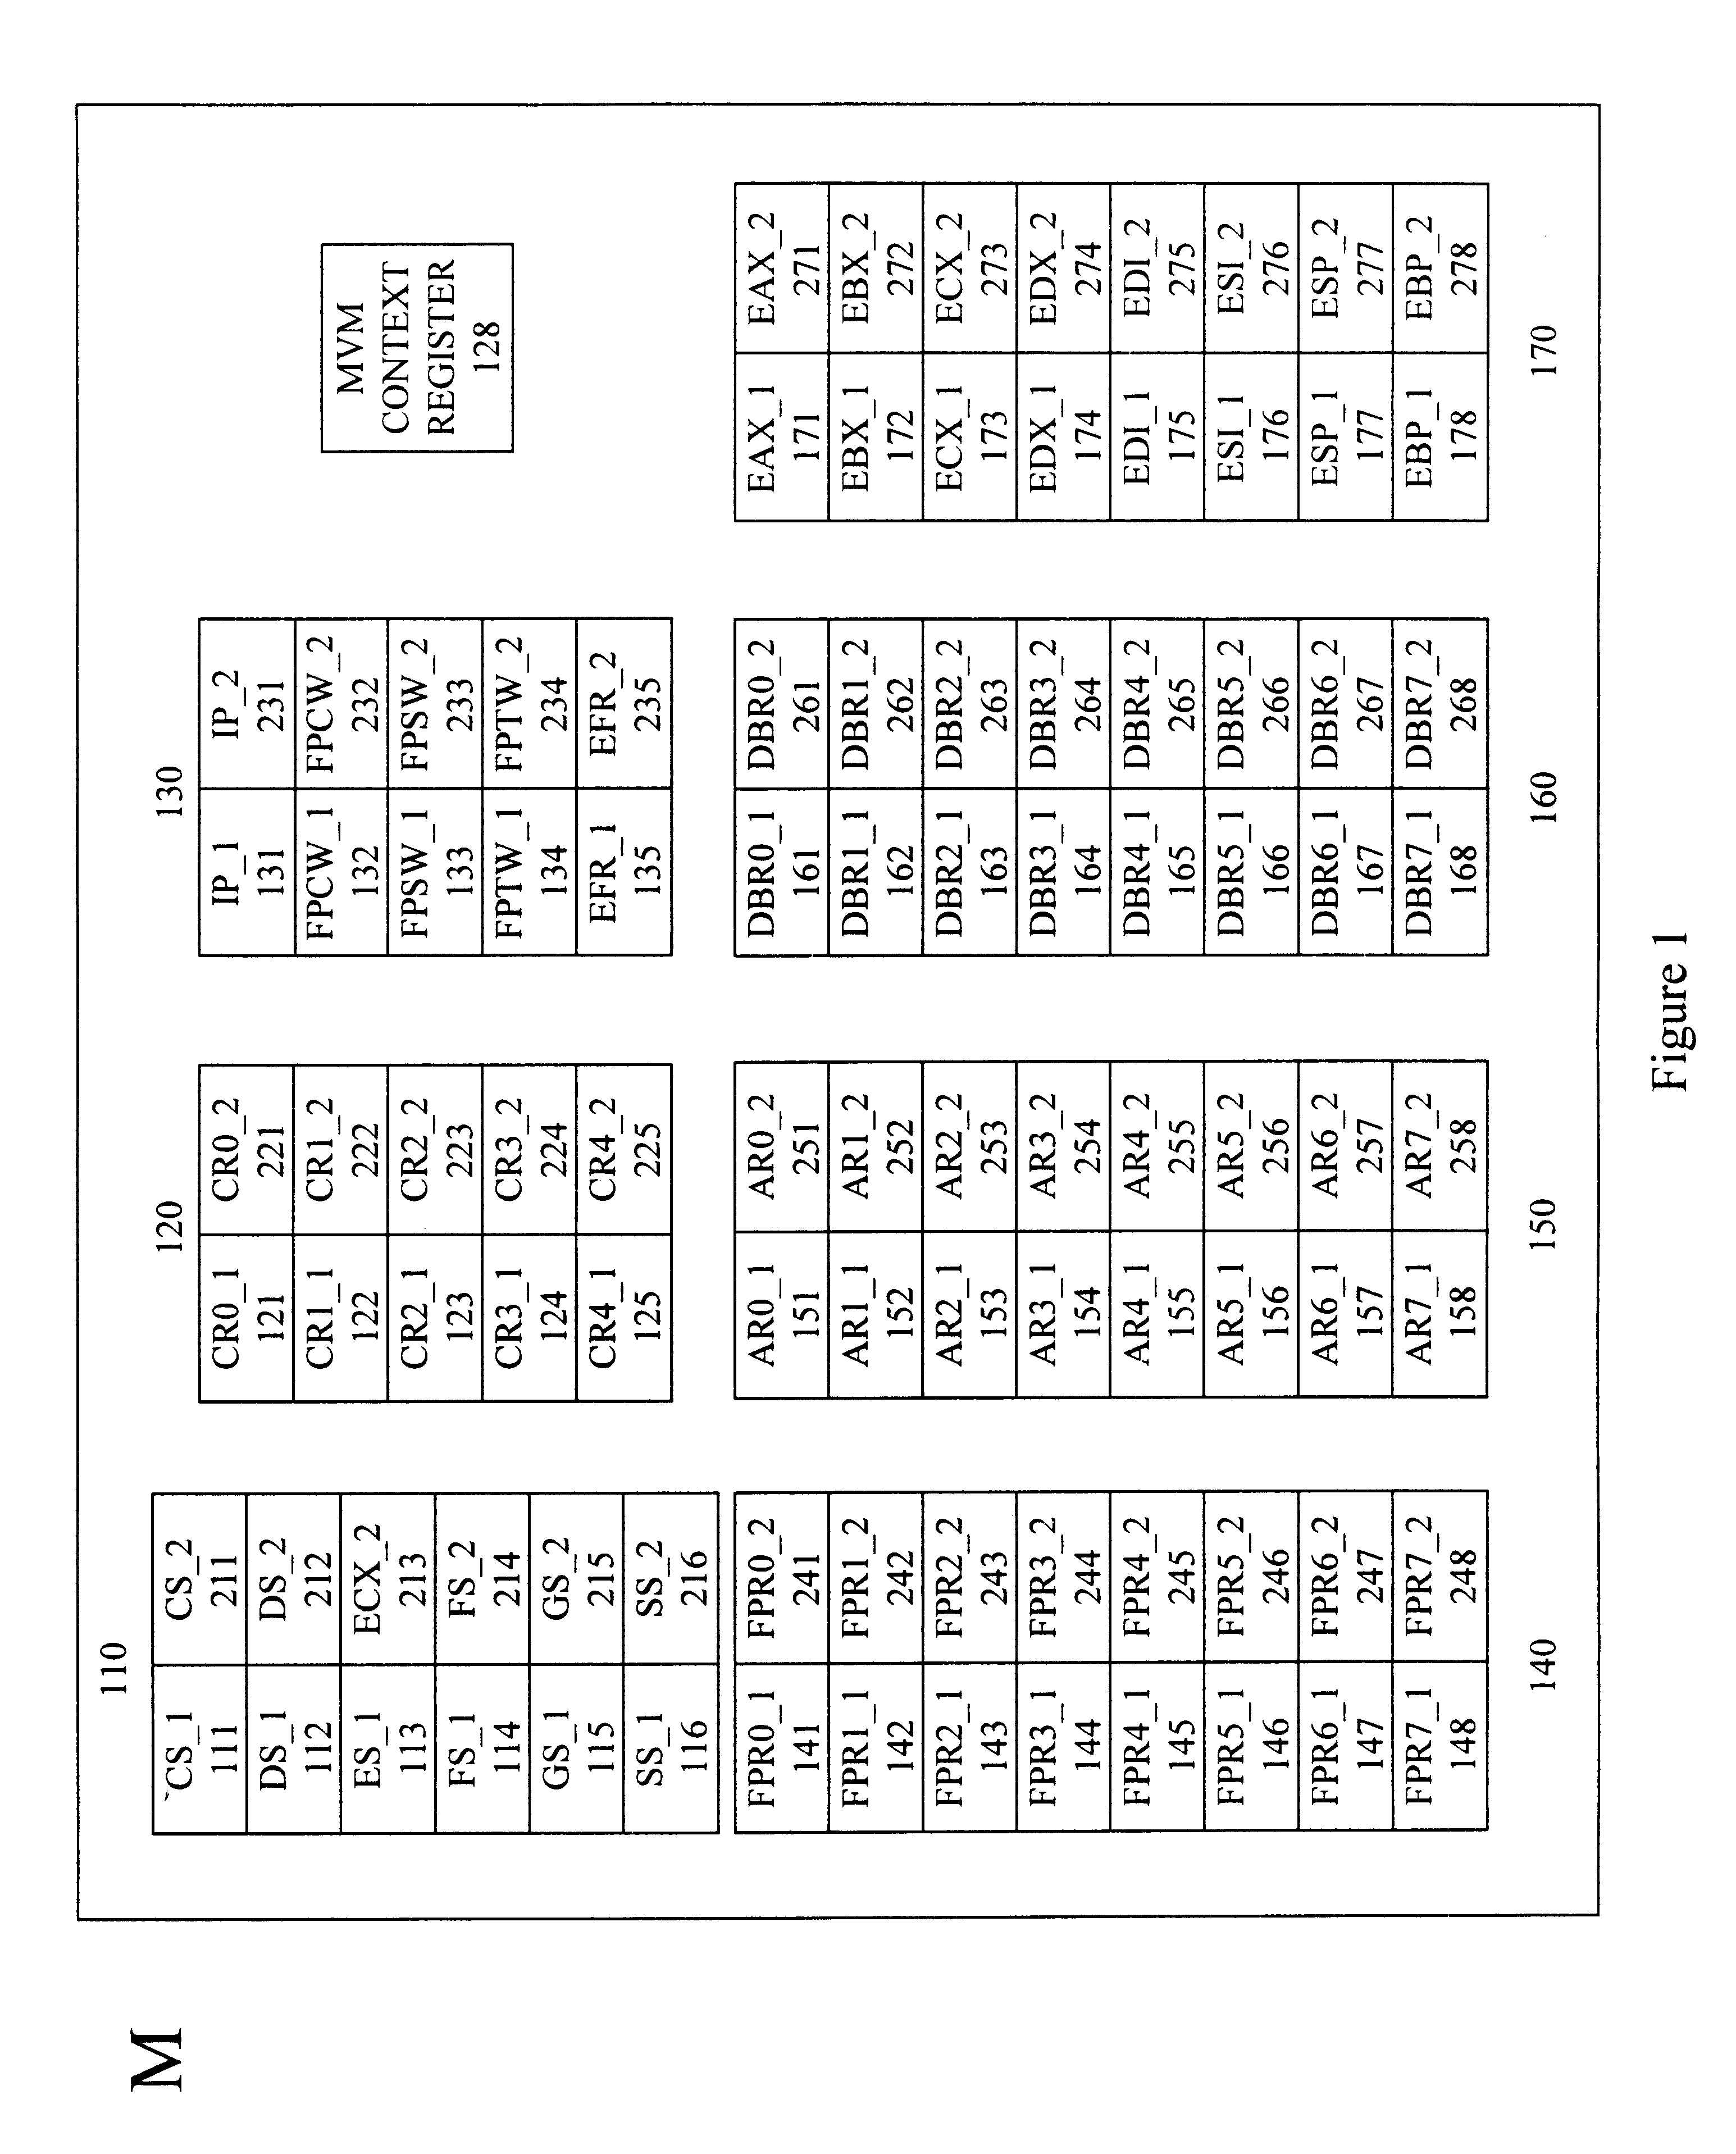 Multiple protected mode execution environments using multiple register sets and meta-protected instructions